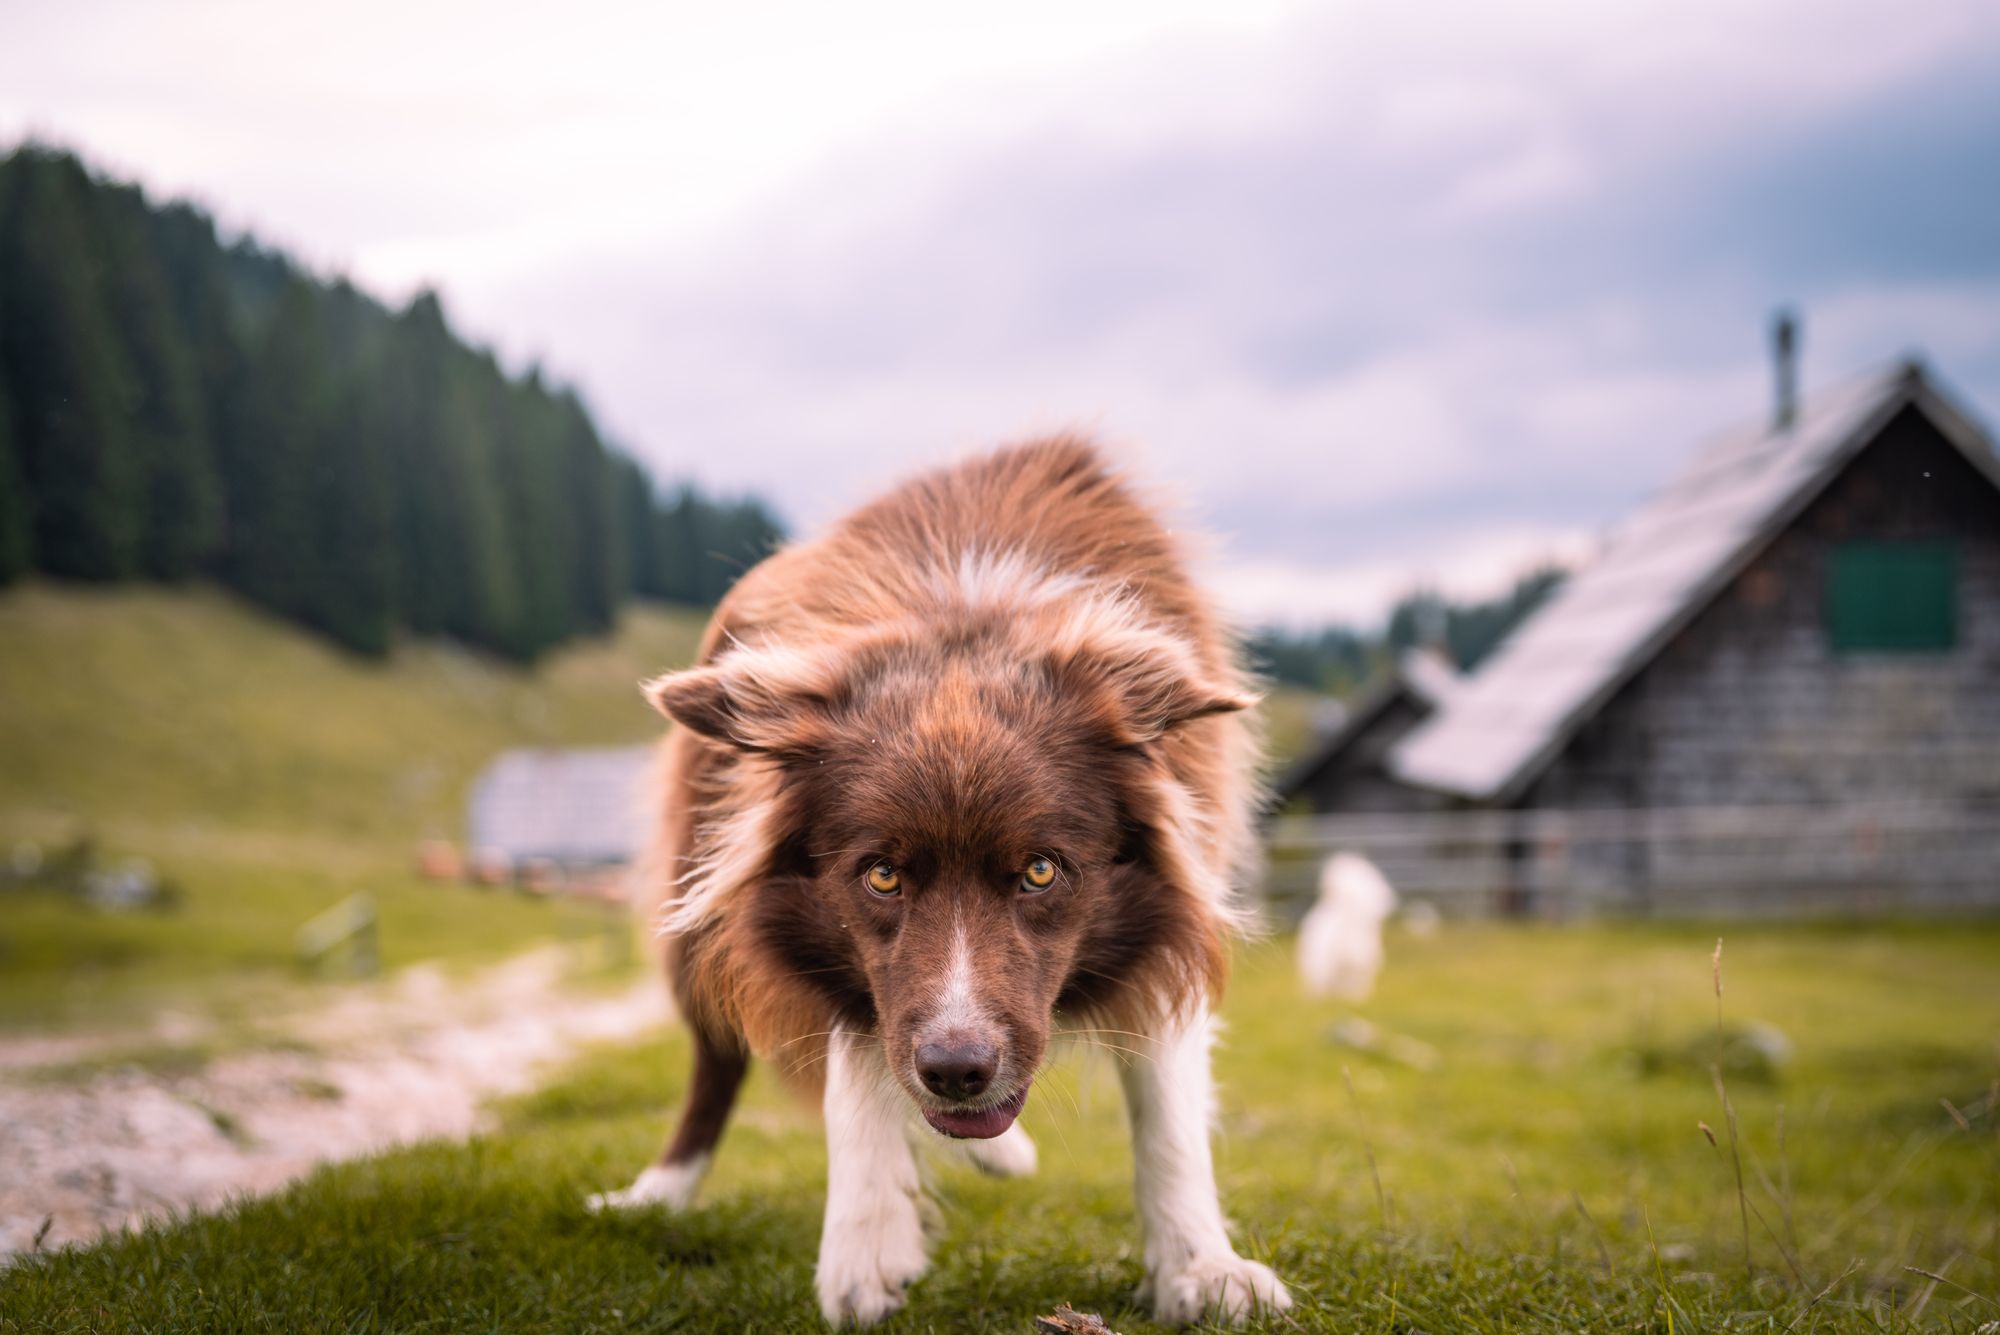 A dog stares down the camera lens in the Slovenian mountains.